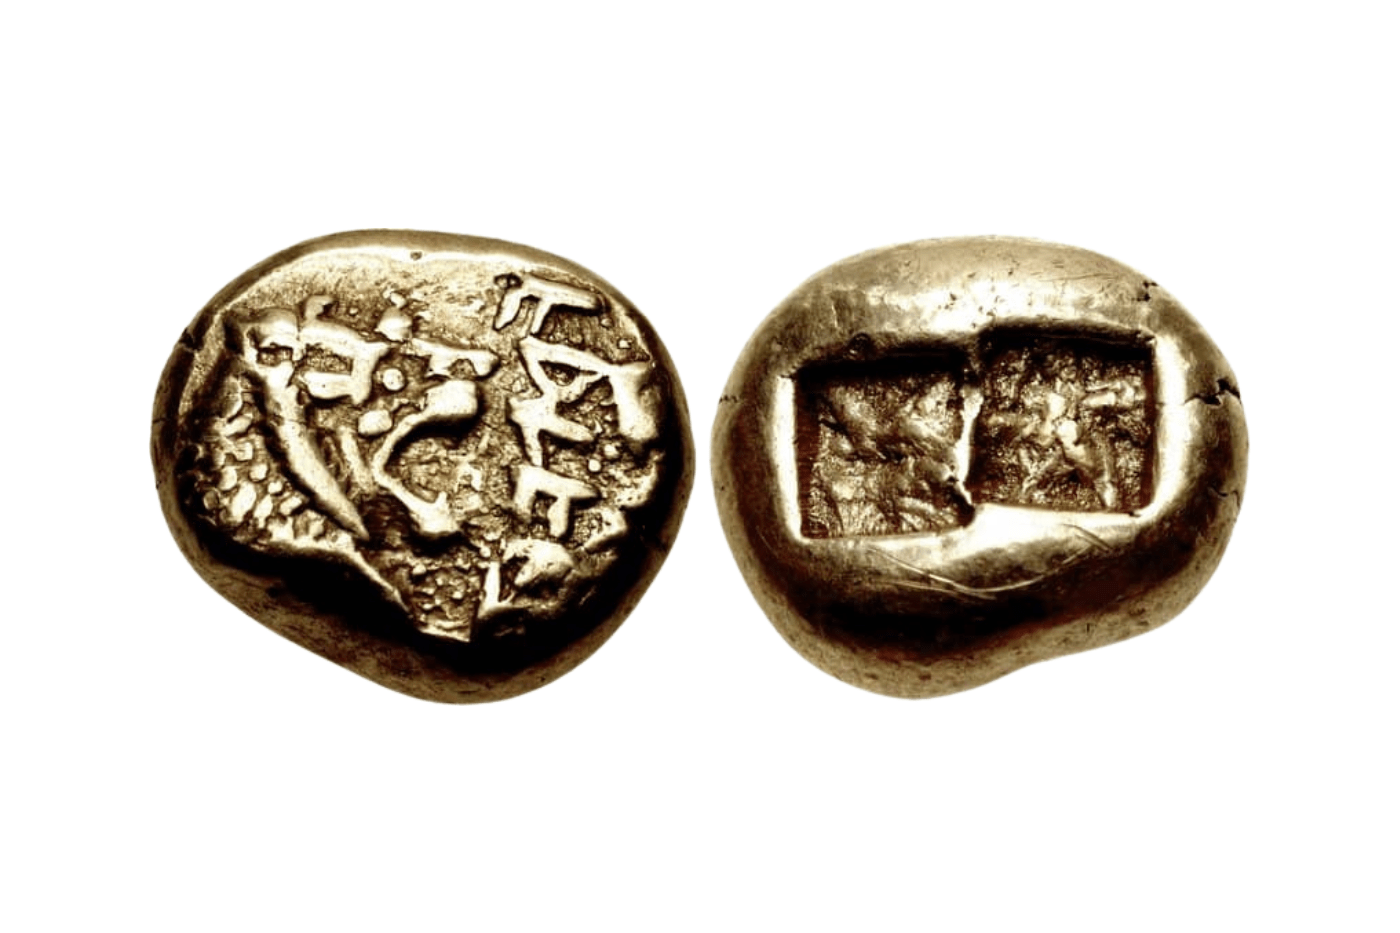 Lydian stater coins made of silver and gold alloy, electrum